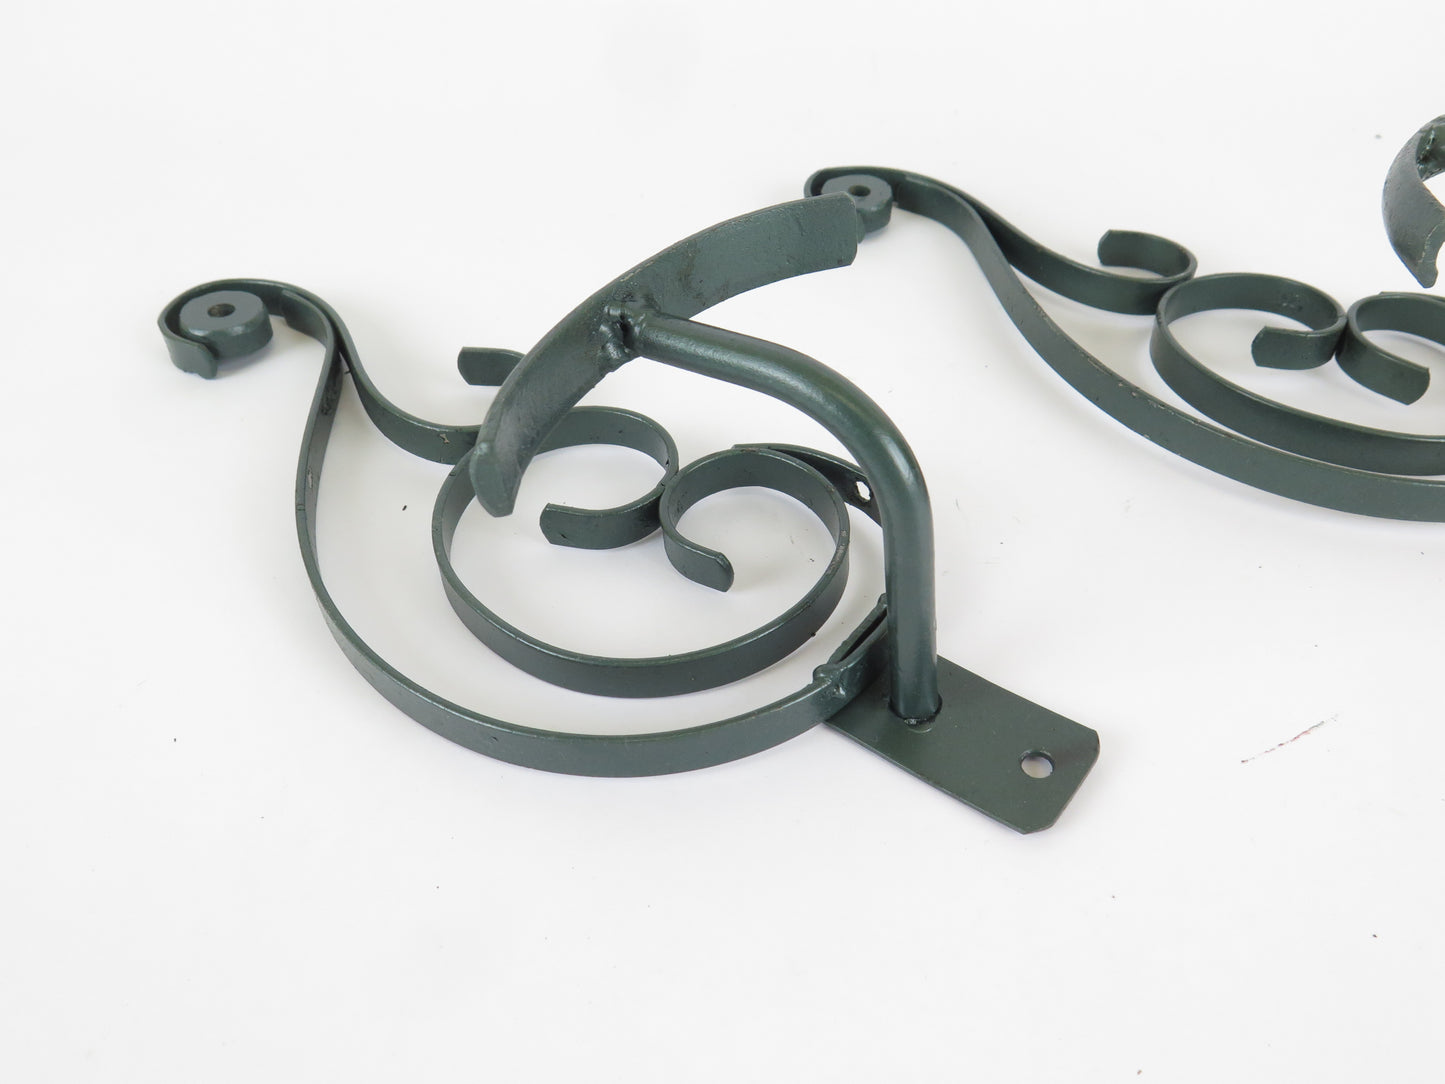 THREE HAND FORGED WROUGHT IRON COAT RACKS DECORATED WITH VOLUTES CH3